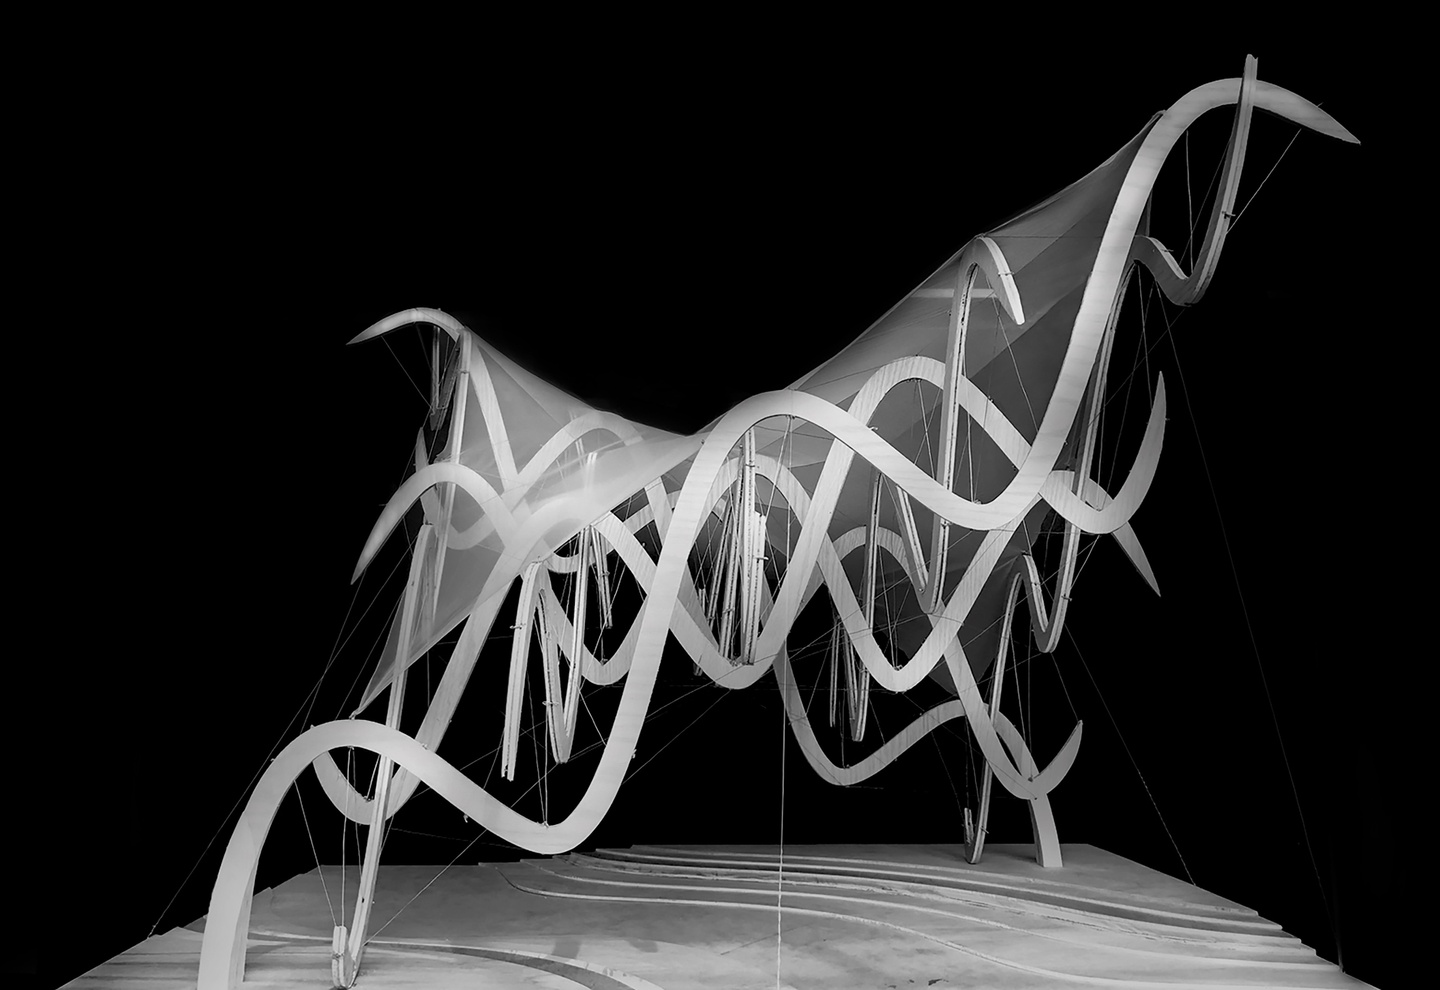 Black and white photo, showing wavy structures of an architectural model with a thin covering over them, set against a black background.